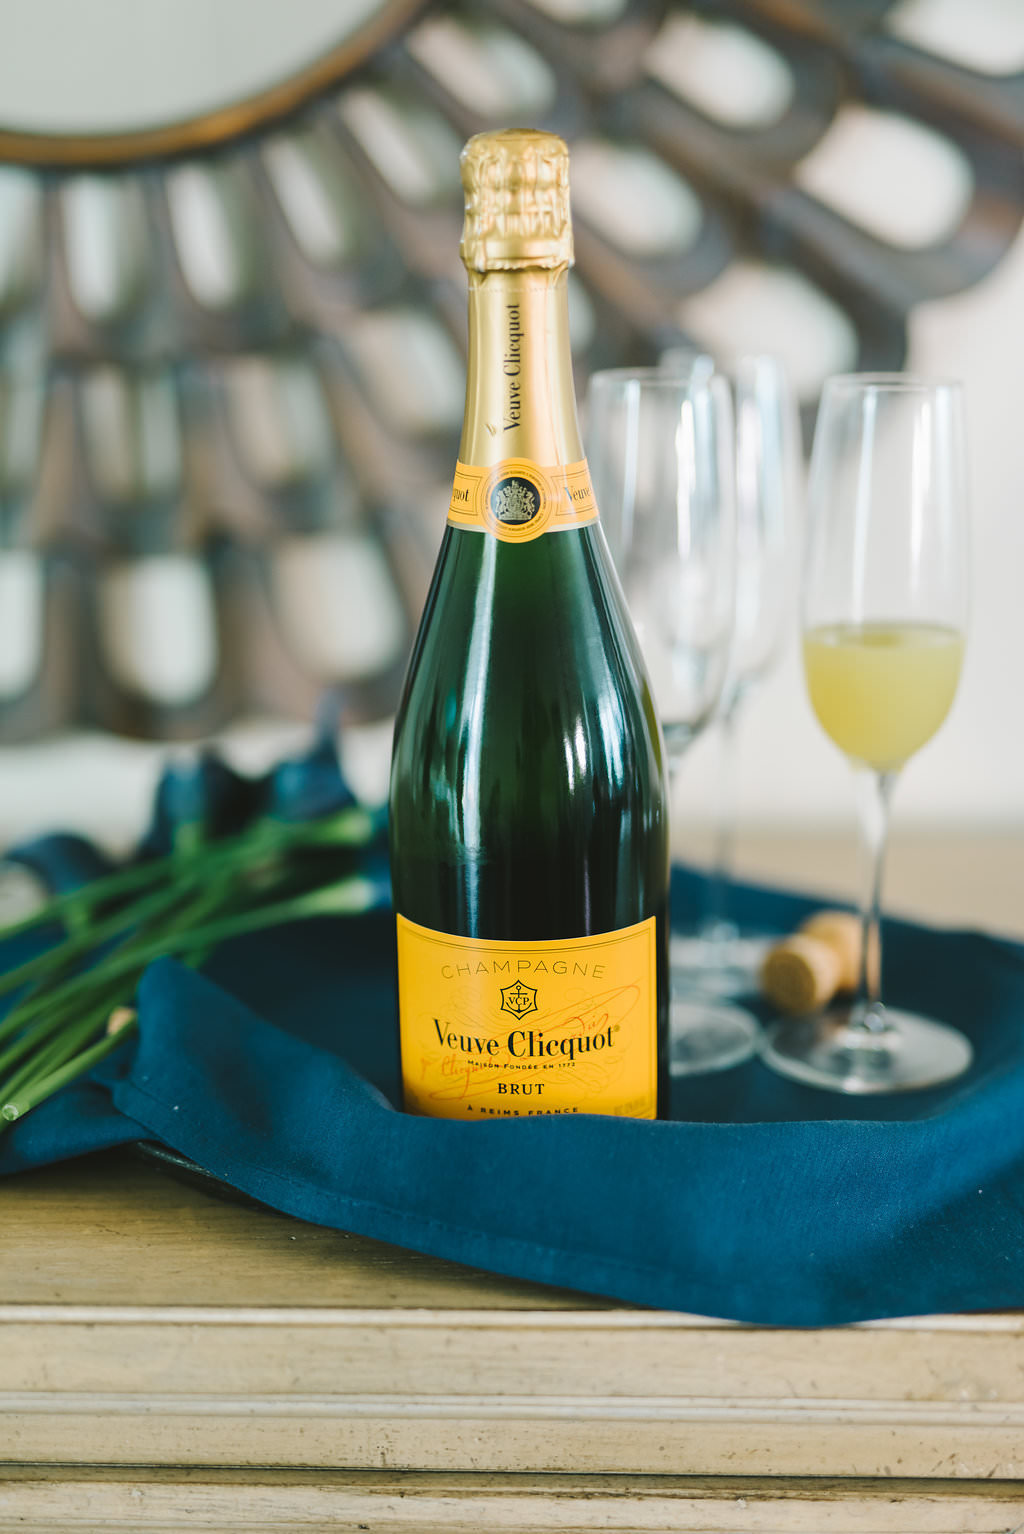 Veuve Clicquot Bottle of Champagne | Tampa Bay Wedding Photographer Kera Photography